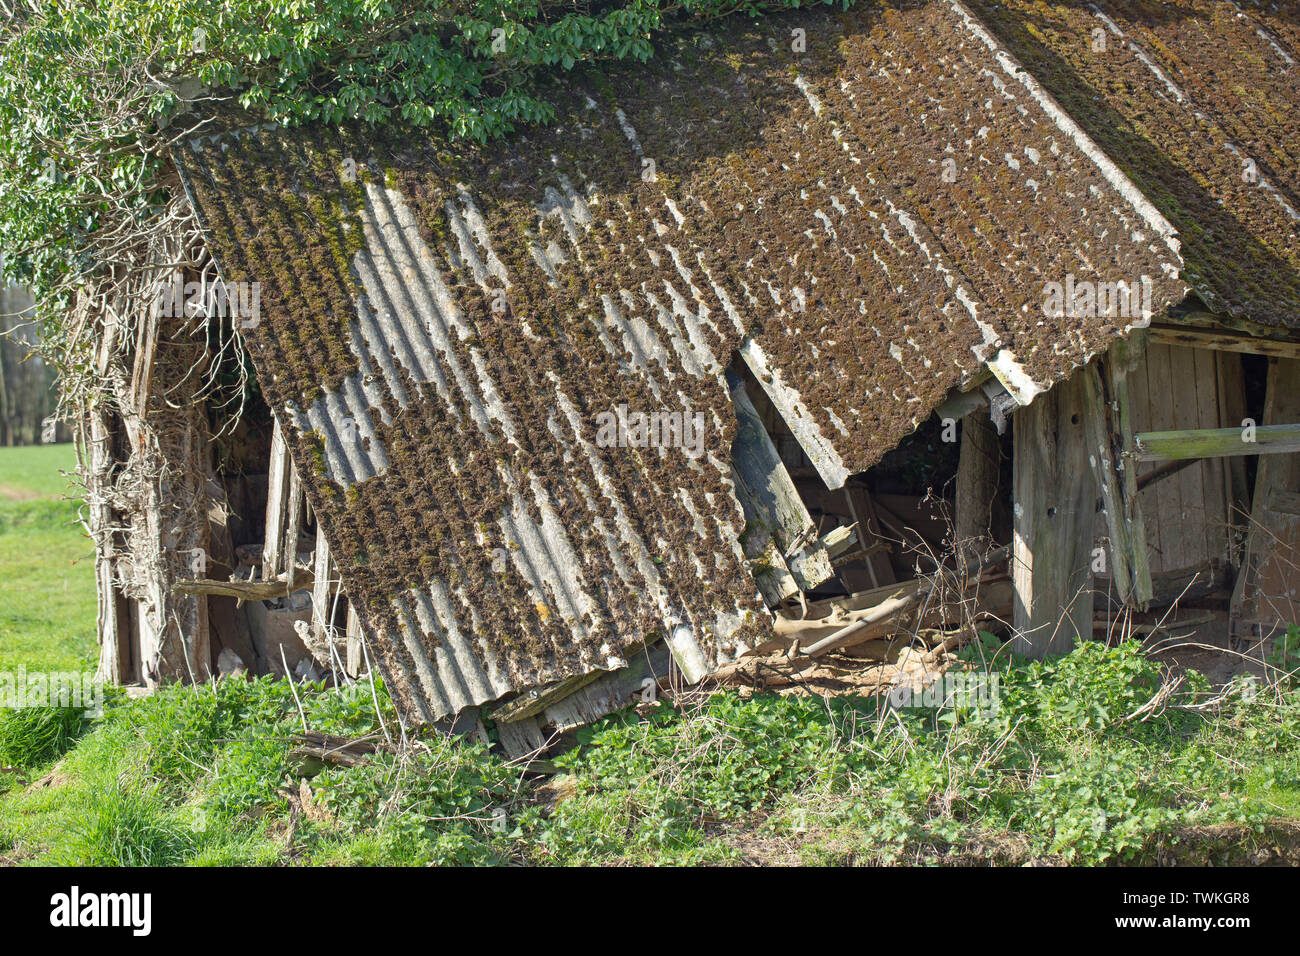 Corrugated sheet asbestos roofed, former cattle field shed and shelter. Redundant. No longer used. Within a field on agricultural land. Timber support structure collapsing. Stock Photo